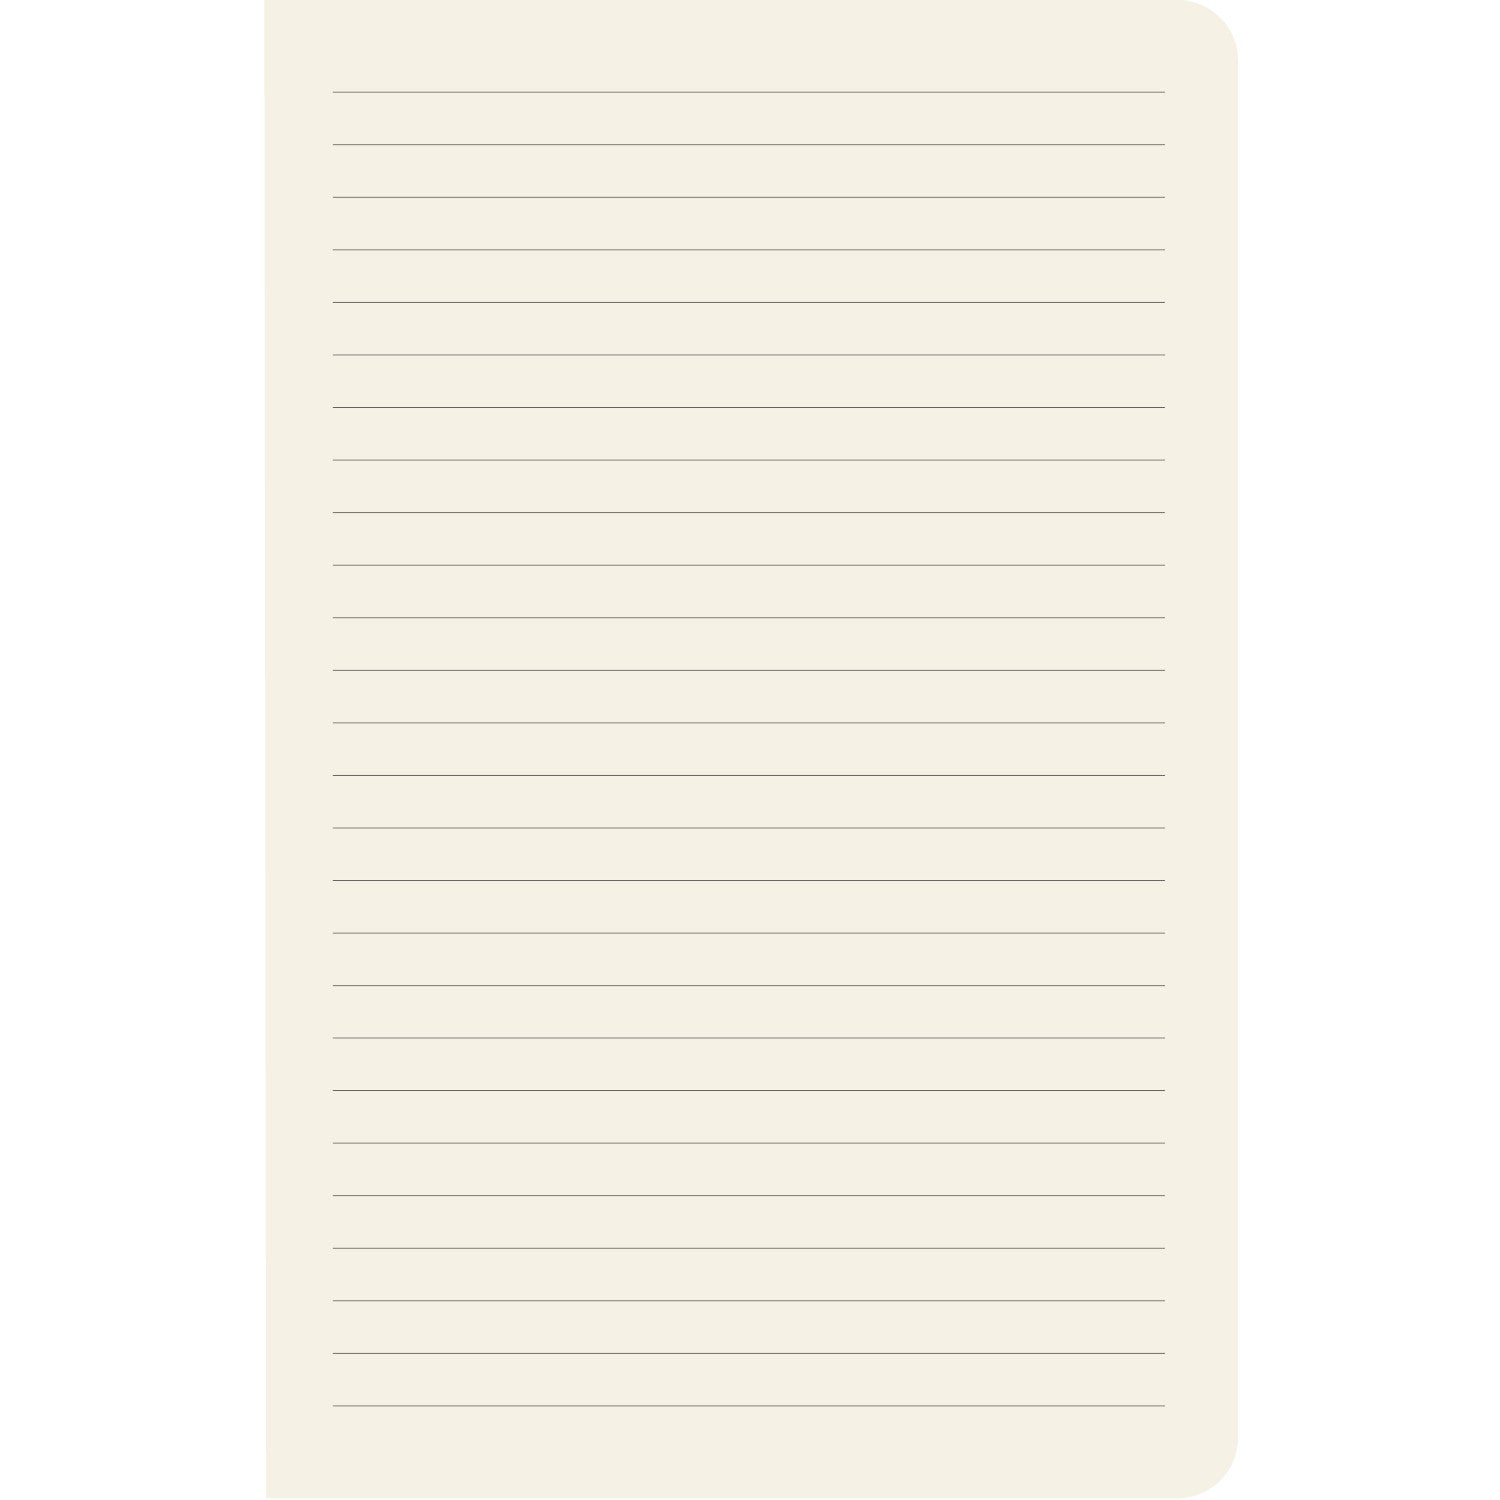 The sheets of the Summer Camp Notebook feature horizontal lines for easy writing on the cream paper.